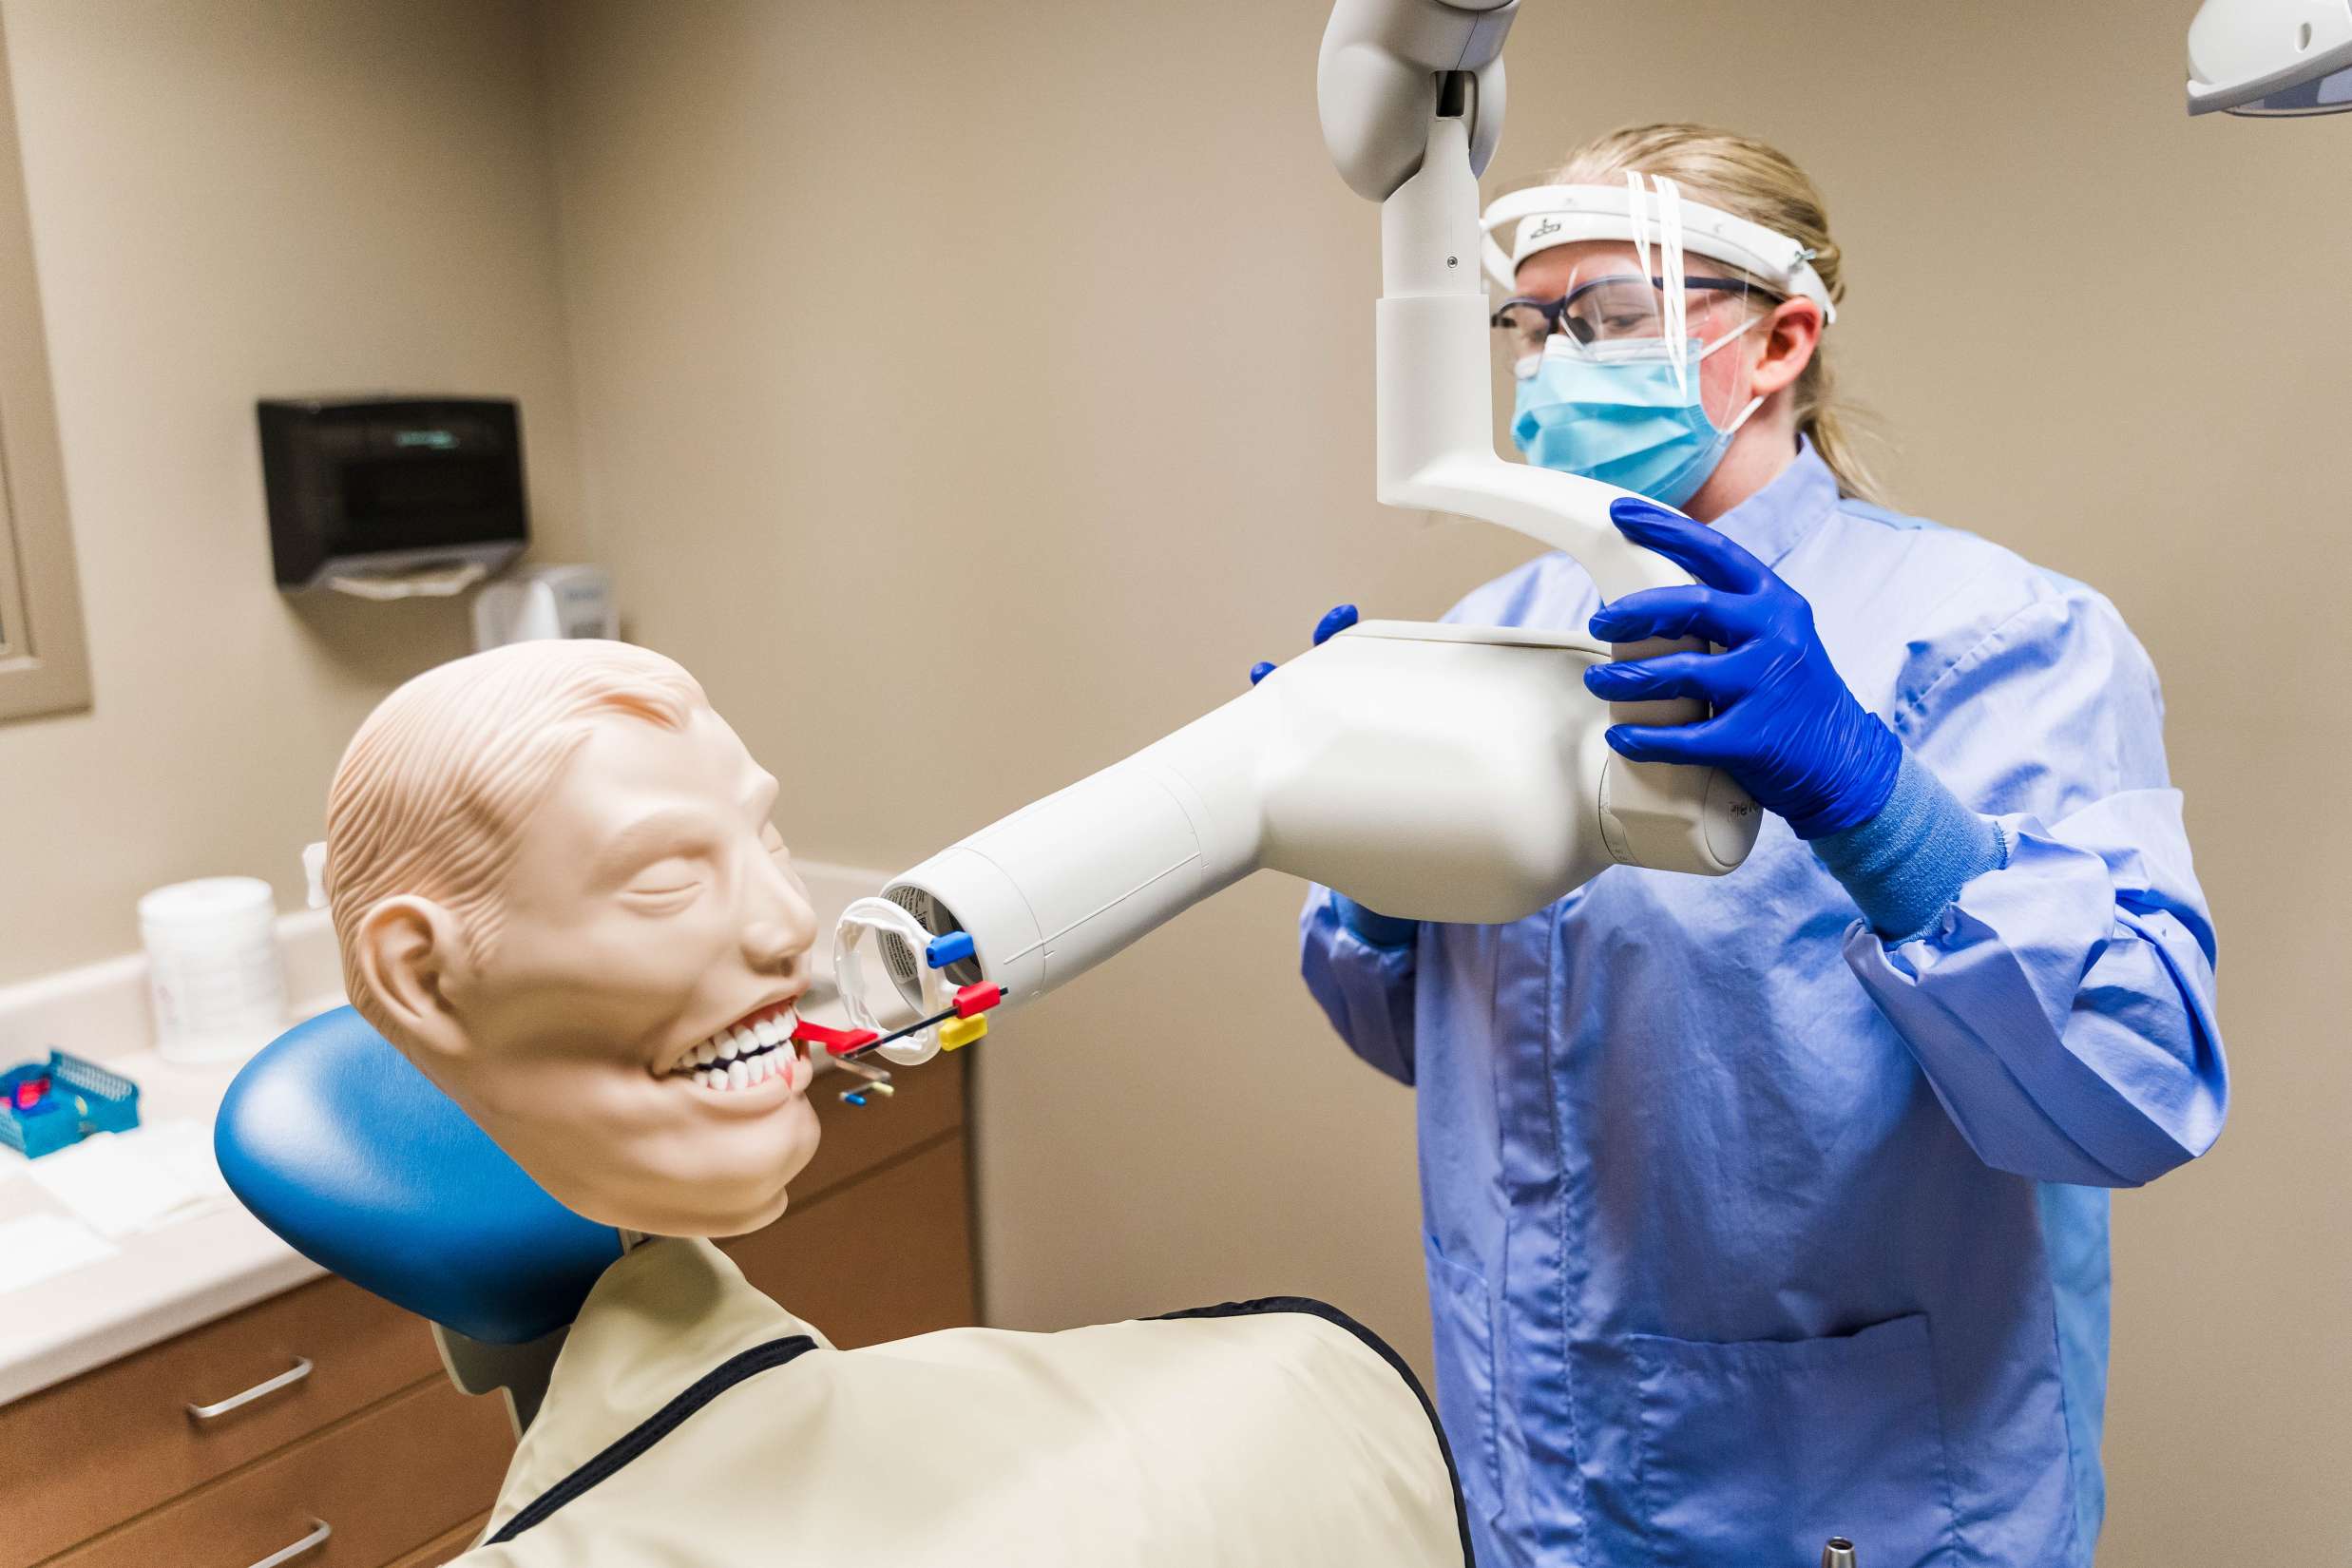 A dental hygienist wearing medical garbs and a face shield is using a mannequin to practice taking an x-ray of a mouth.